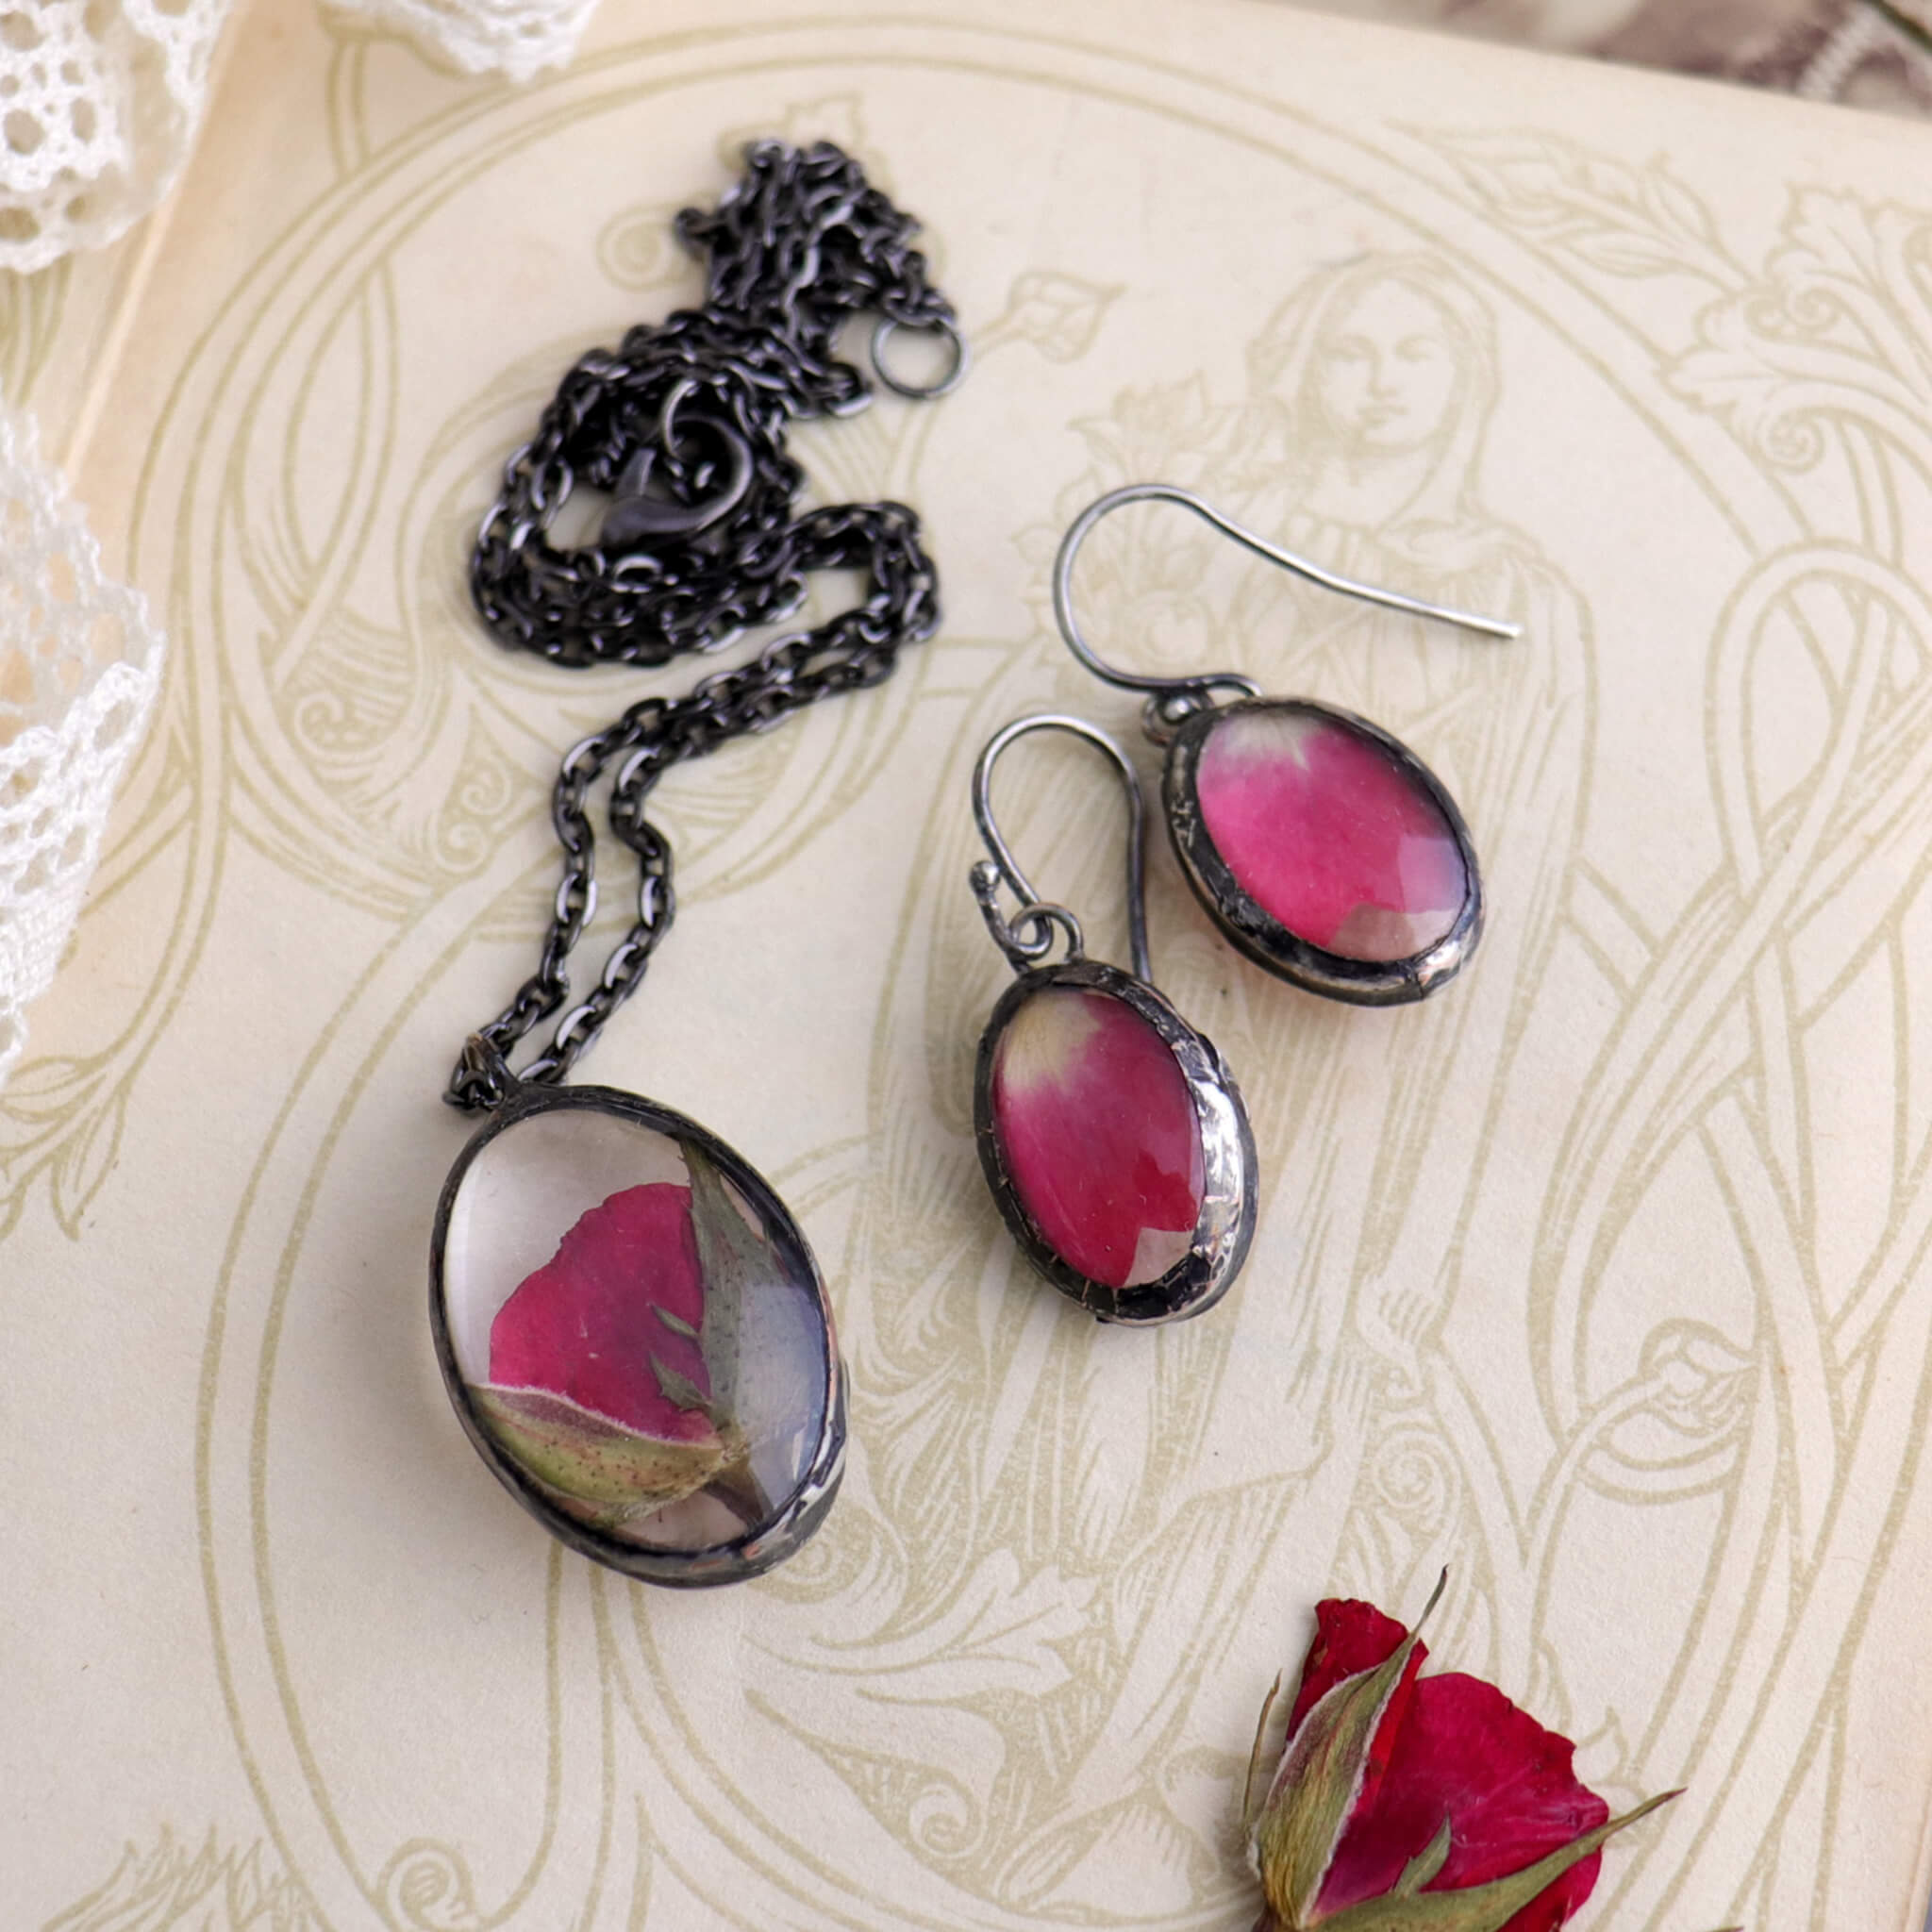 Pressed rose in soldered glass pendant necklace and earrings lying on an old book